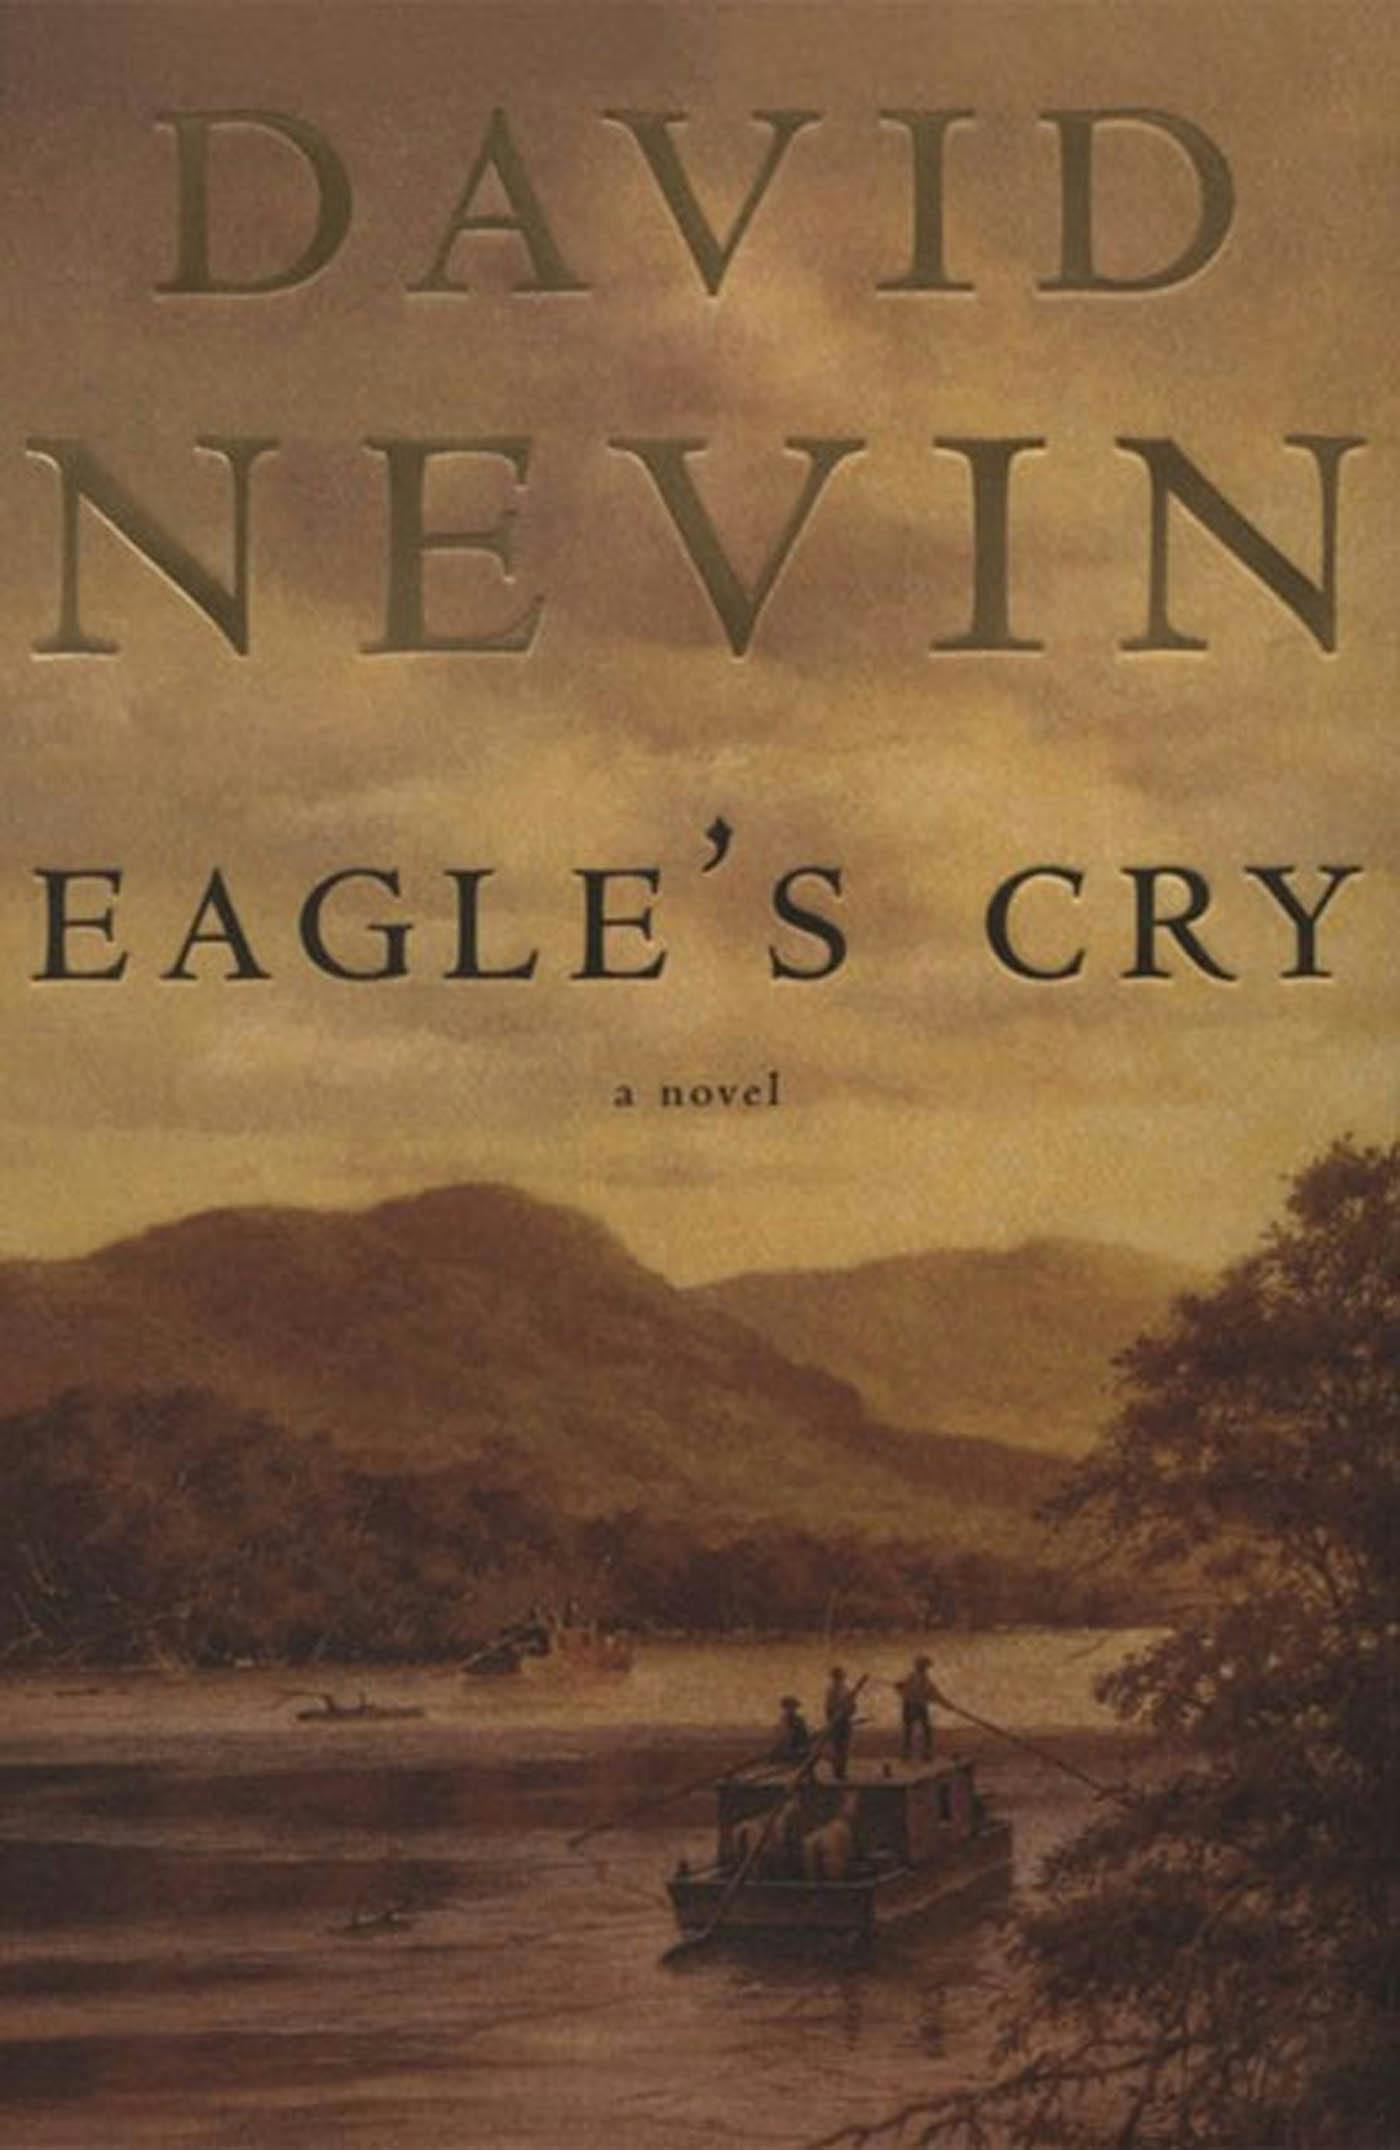 Cover for the book titled as: Eagle's Cry